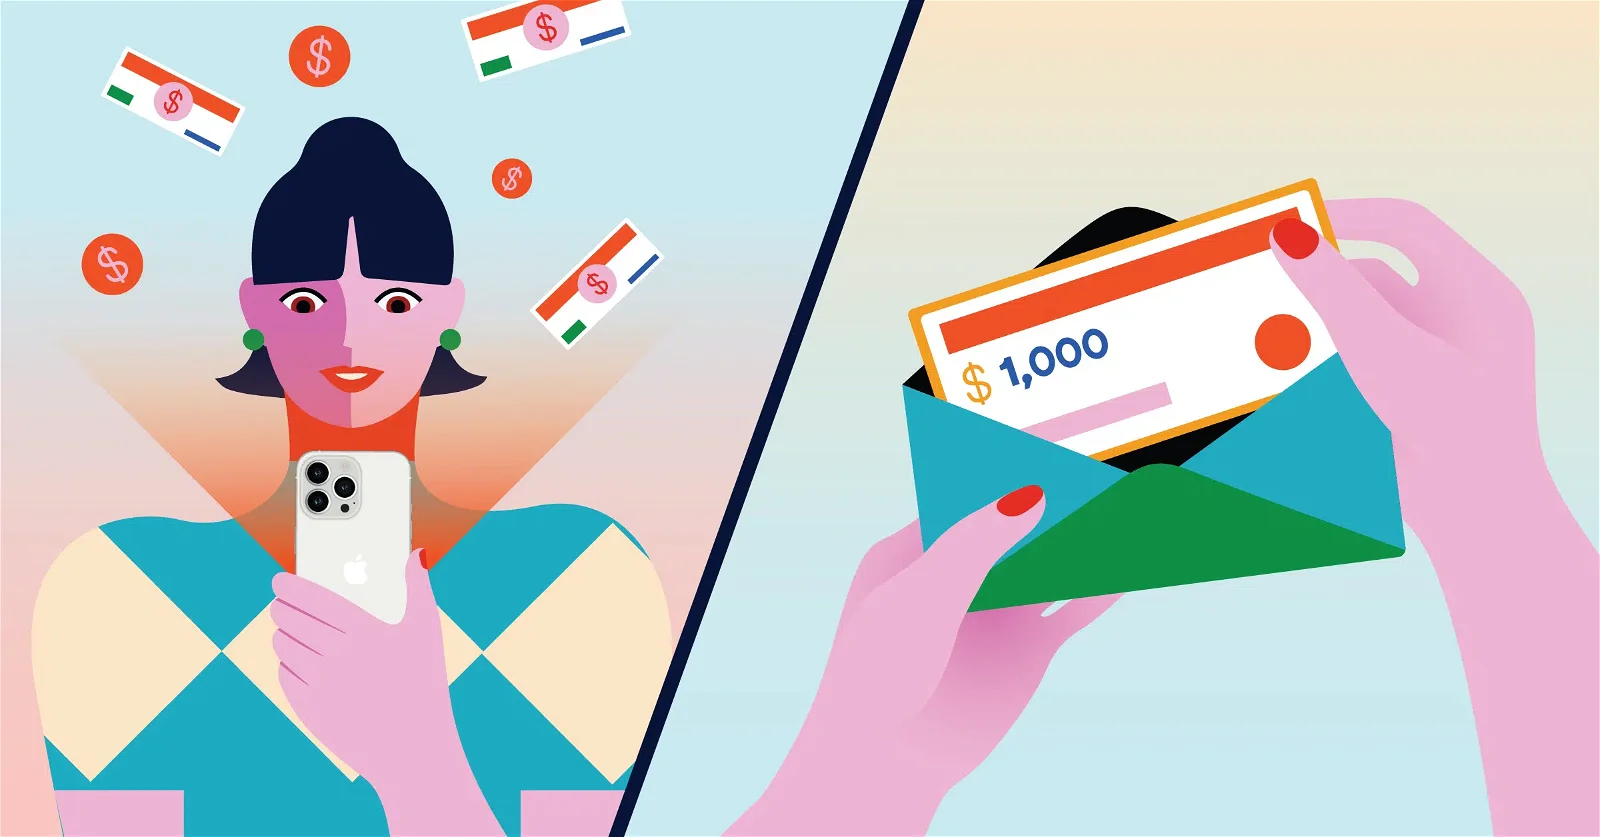 Illustration of a person holding a smartphone with international currencies floating around, and a close-up of hands holding an envelope containing a check for $1,000.